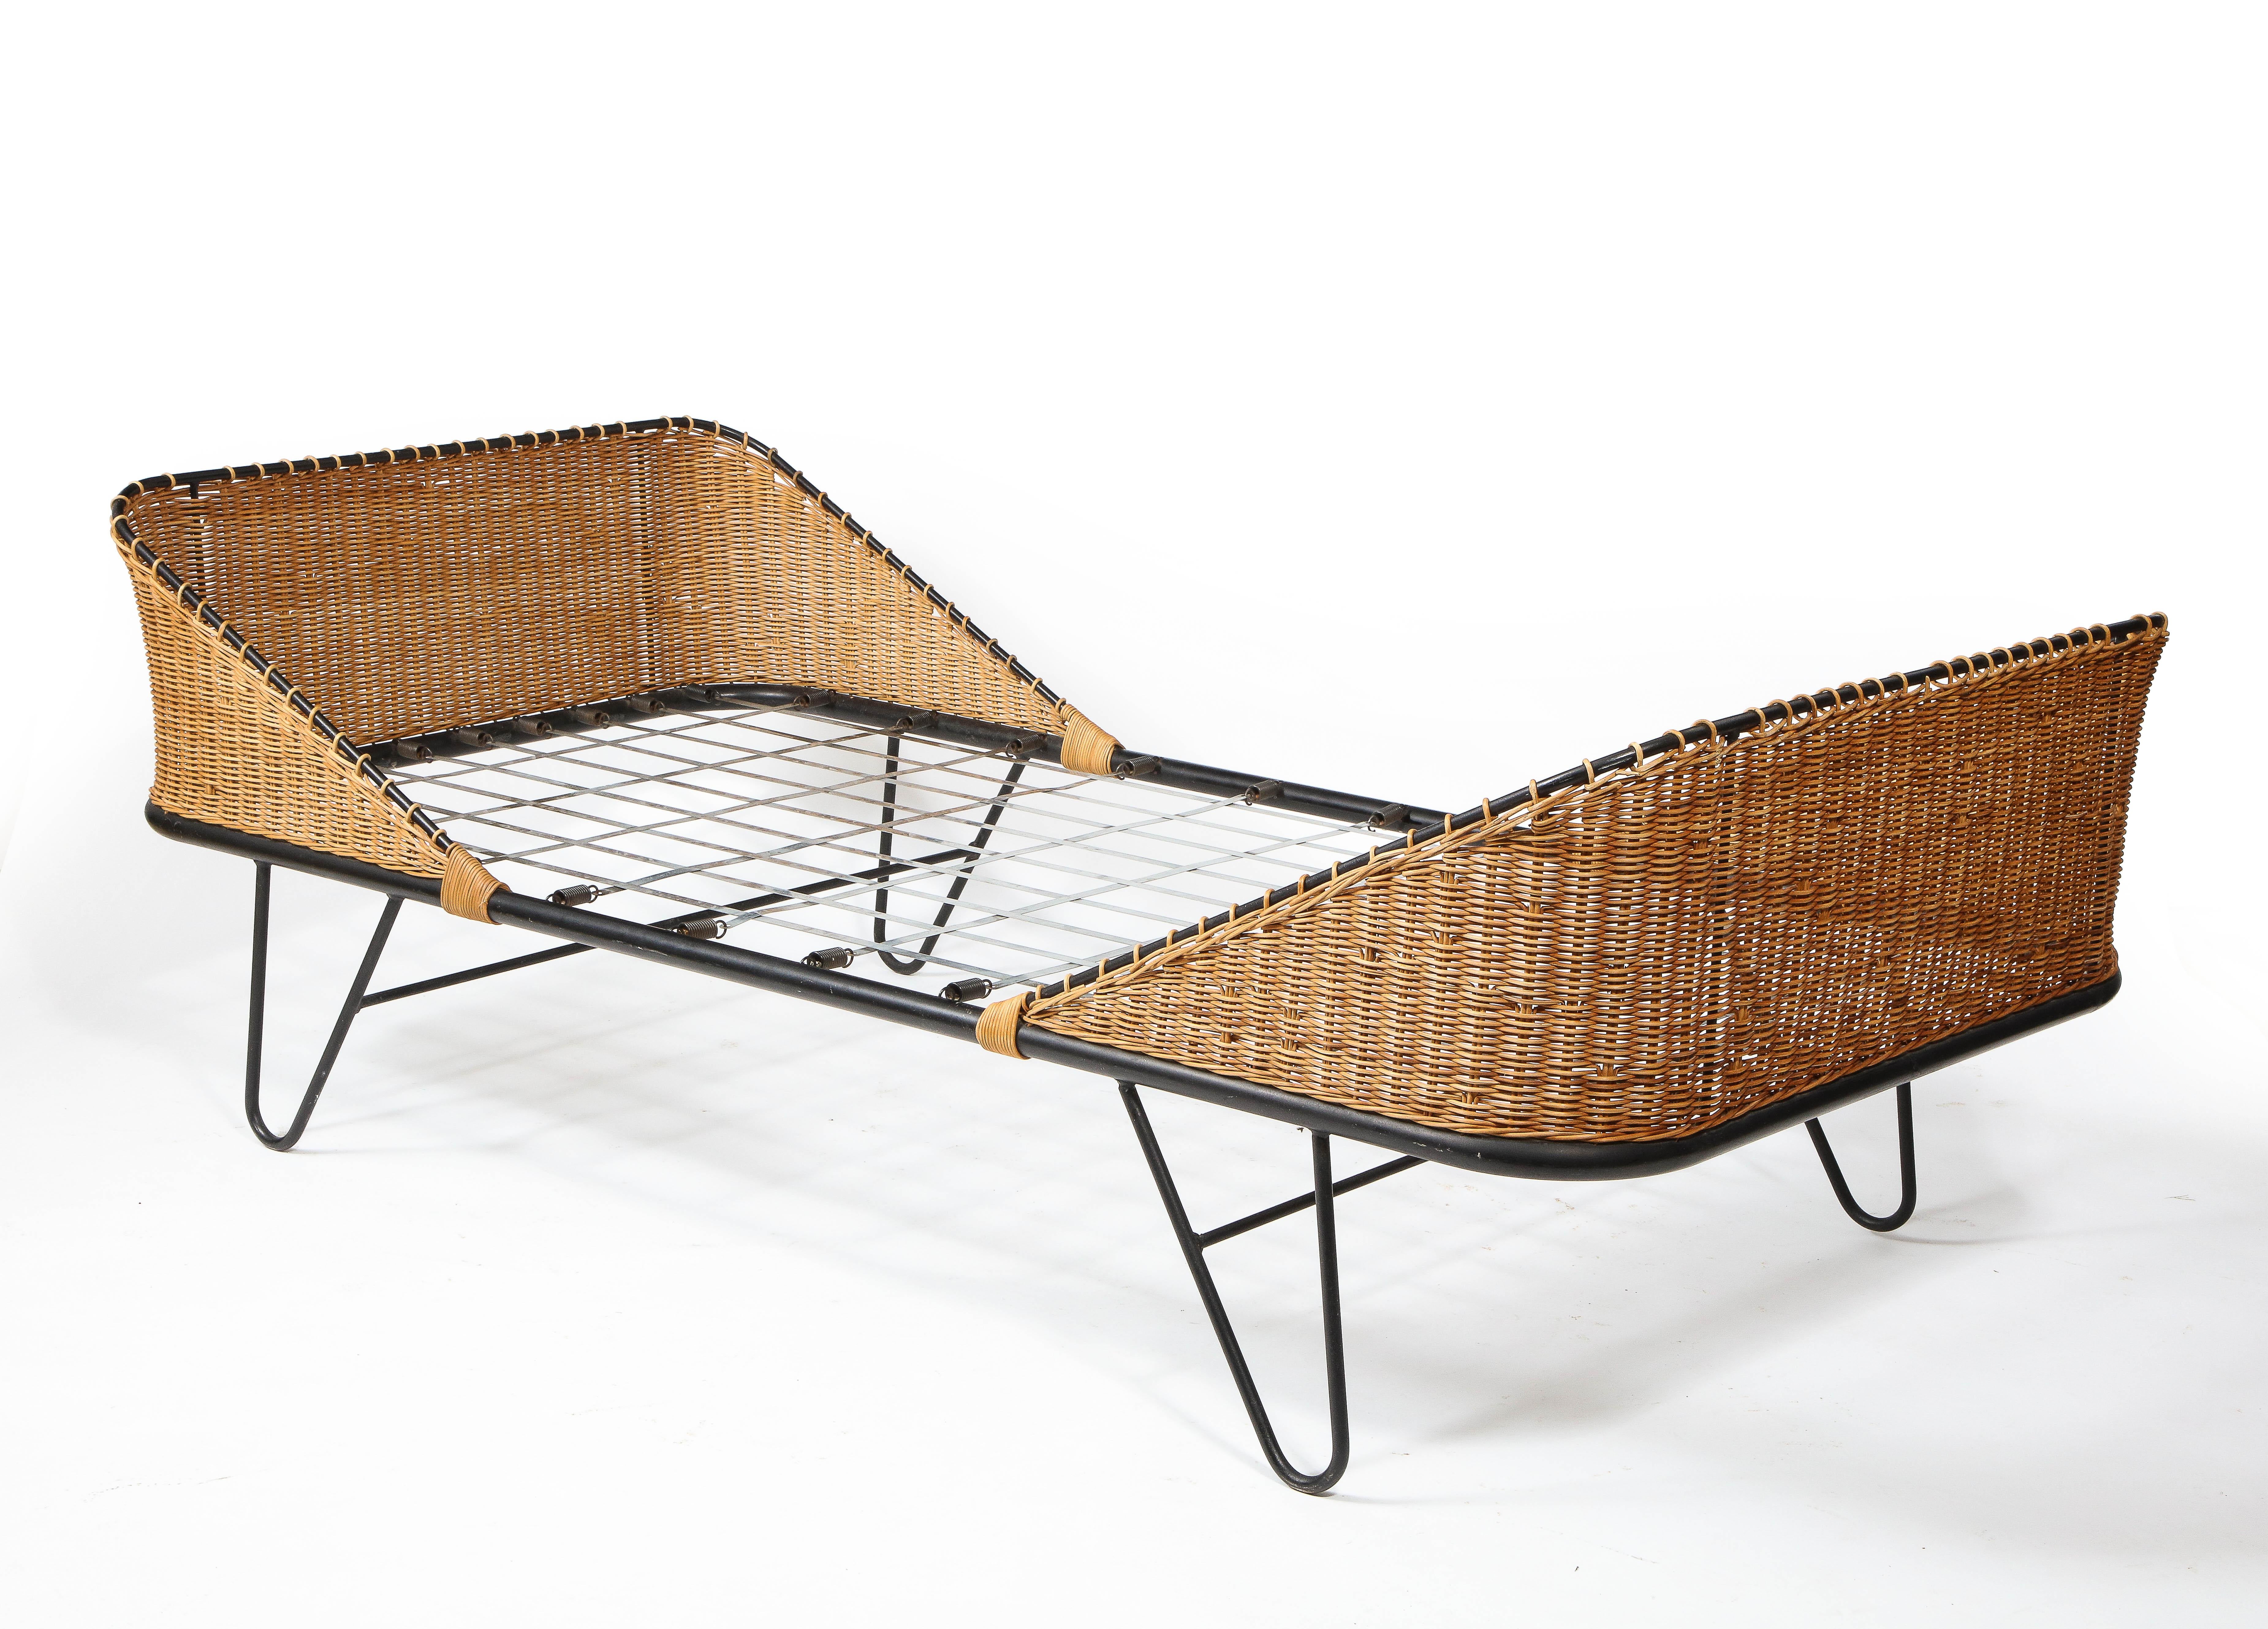 Elegant wrought iron & wicker daybed by Raoul Guy. COM available, a second daybed is also available.